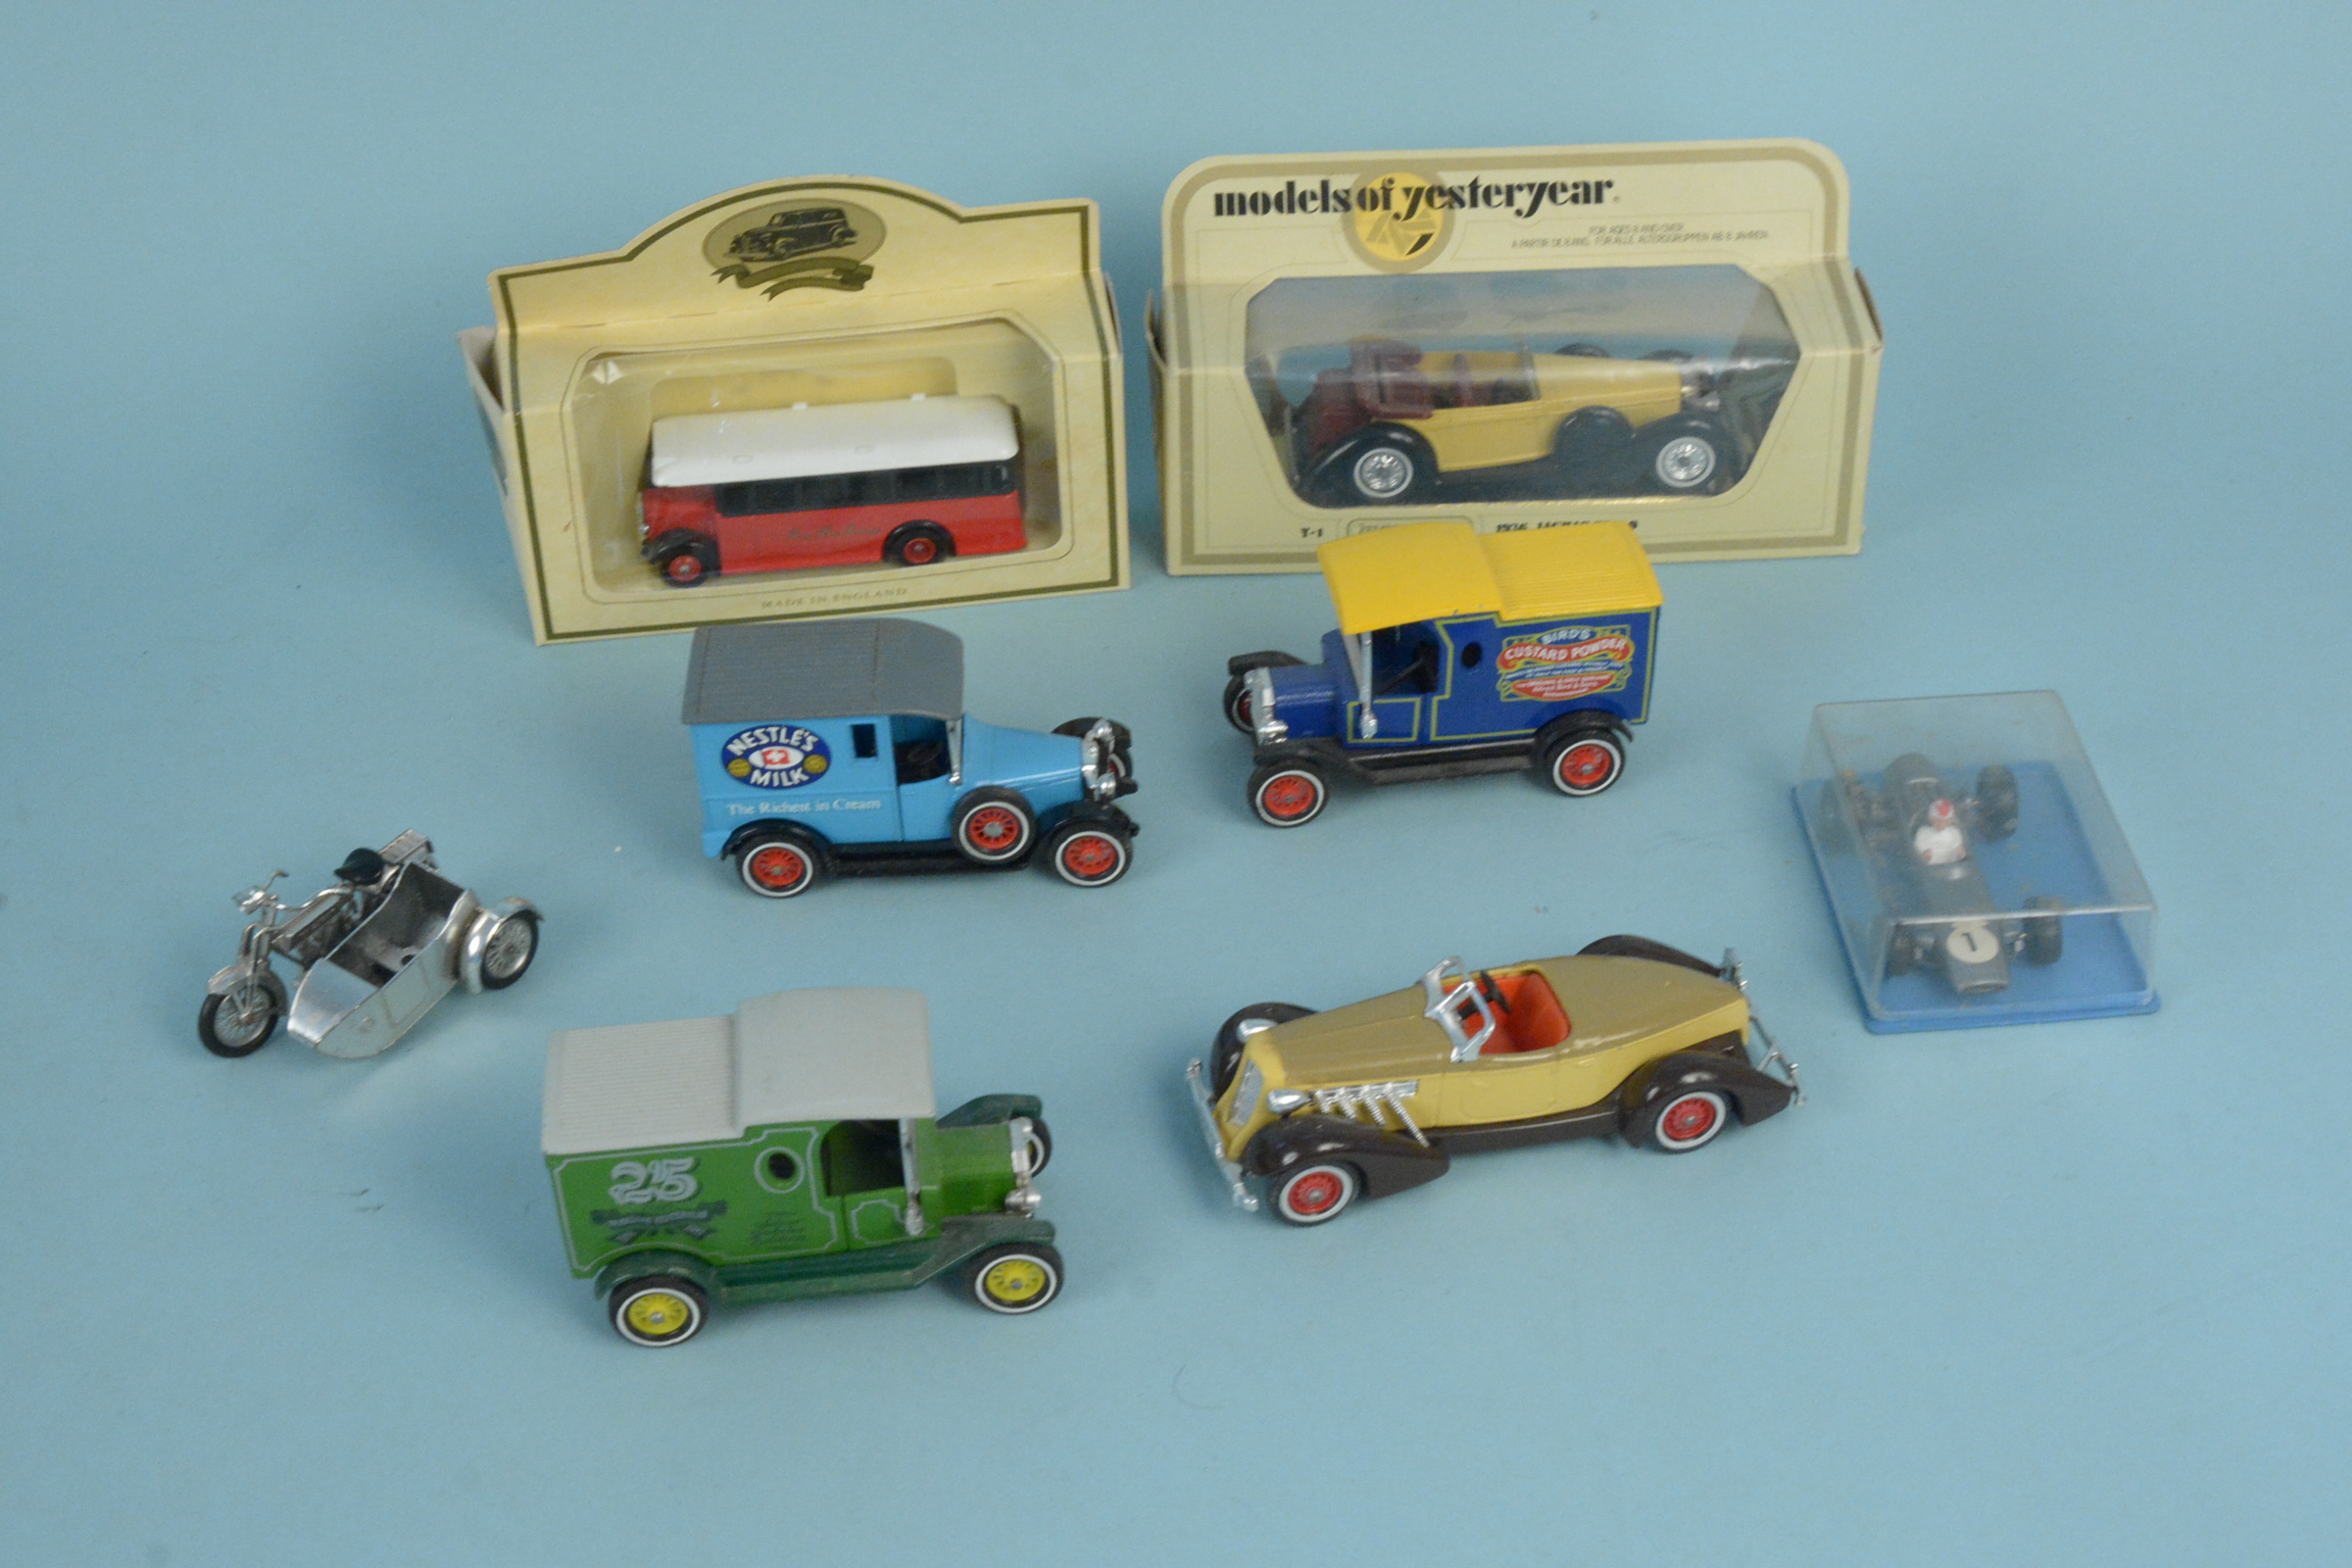 A box of Matchbox Models of Yesteryear including 1981 Royal Wedding bus - Image 3 of 3